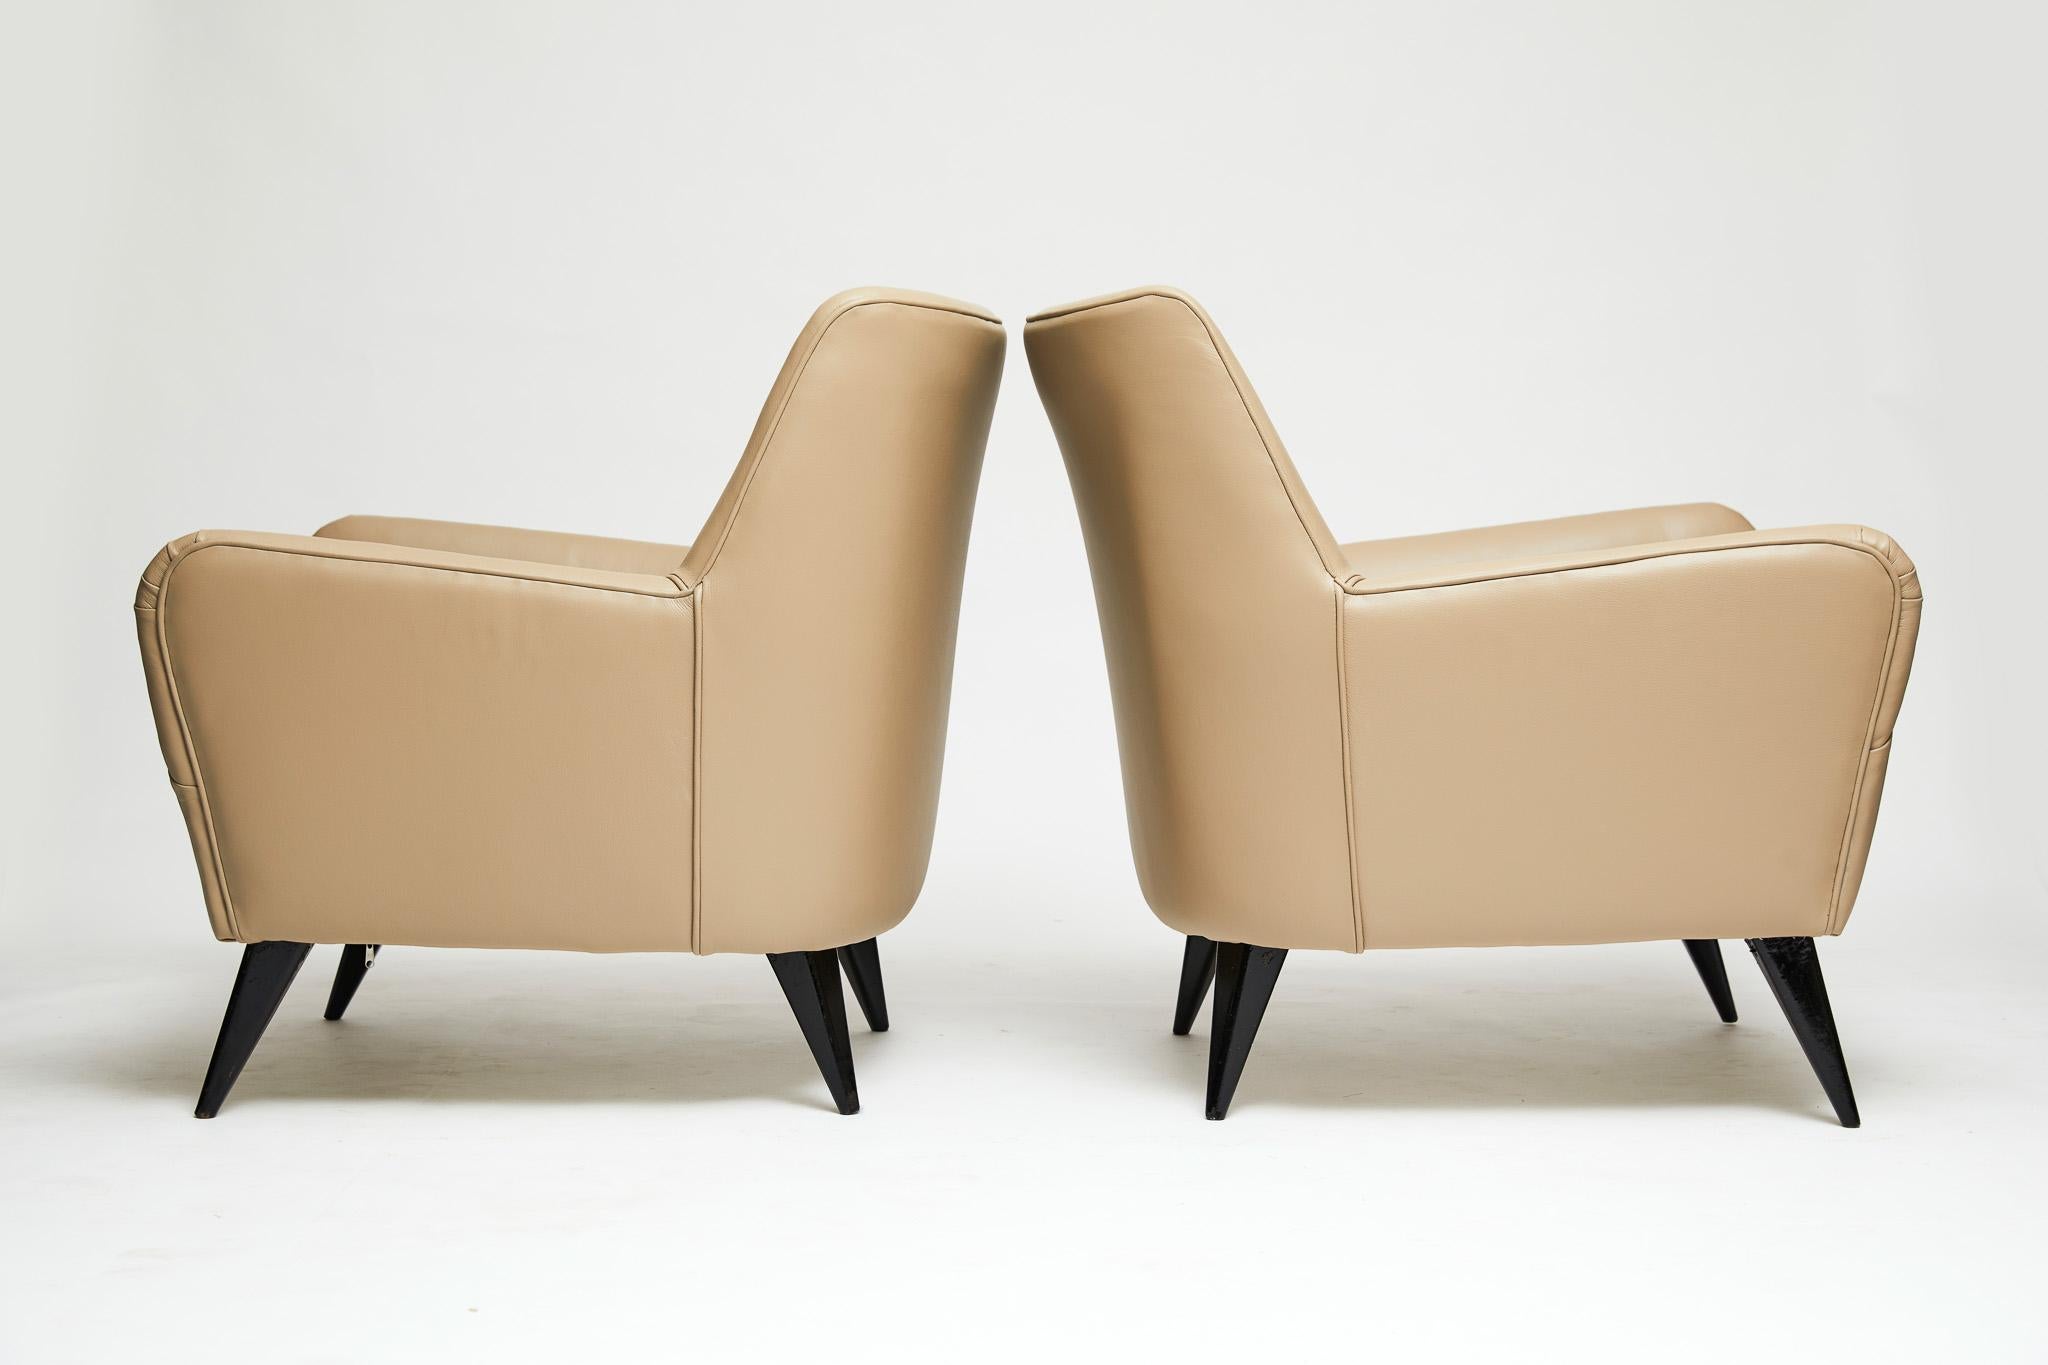 Mid-Century Modern Armchairs in Leather & Wood by Joaquim Tenreiro, 1955, Brazil For Sale 2